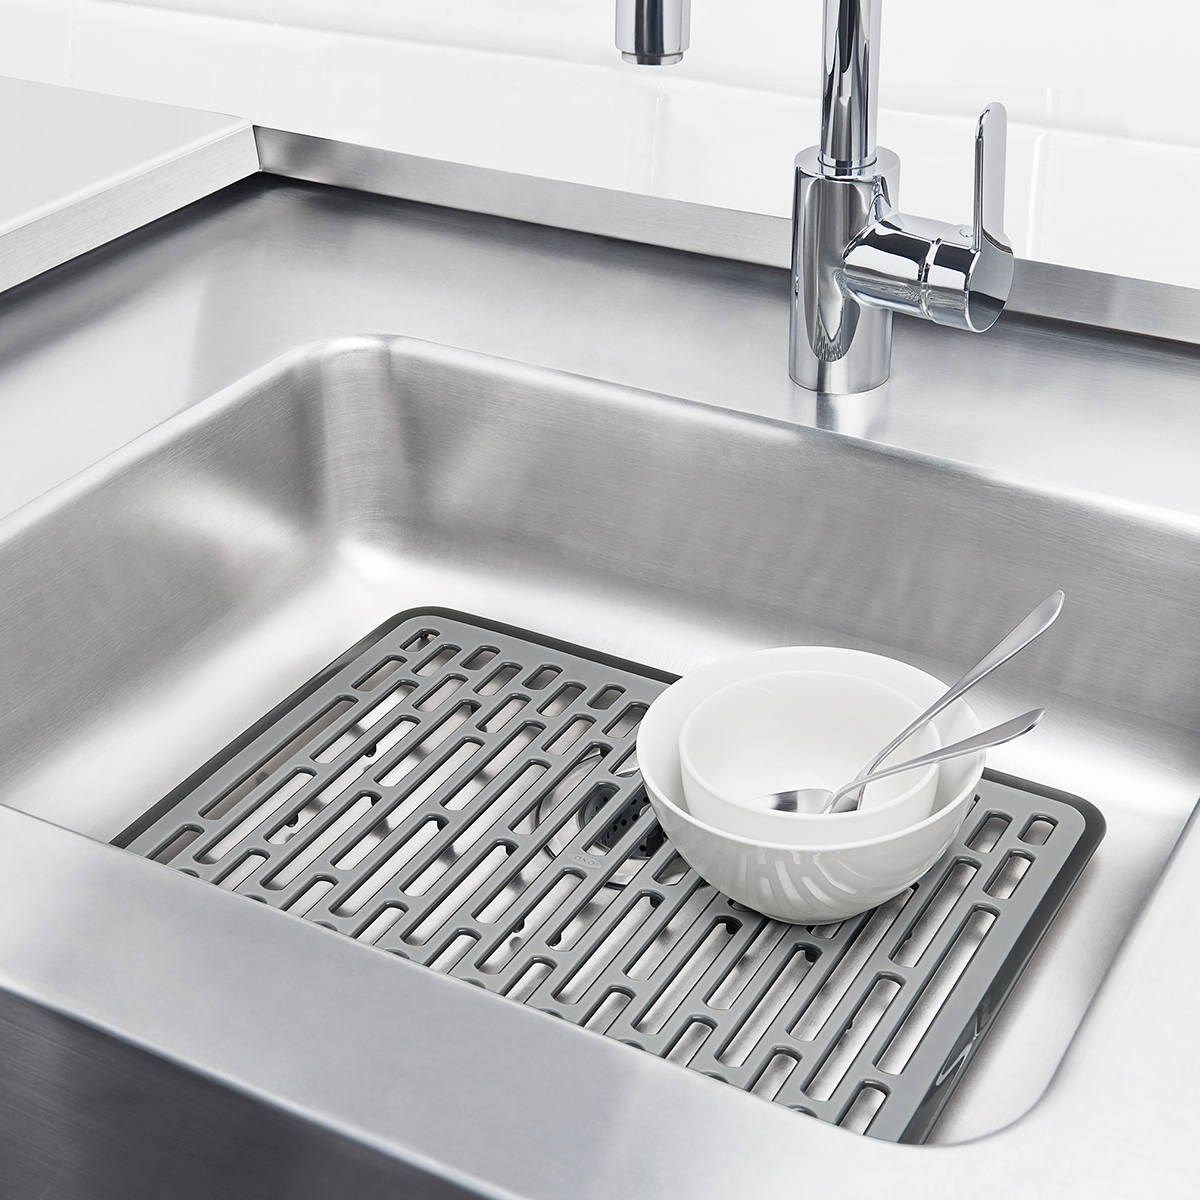 https://www.containerstore.com/catalogimages/342605/10073615-oxo-sink-mat-grey-large-VEN.jpg